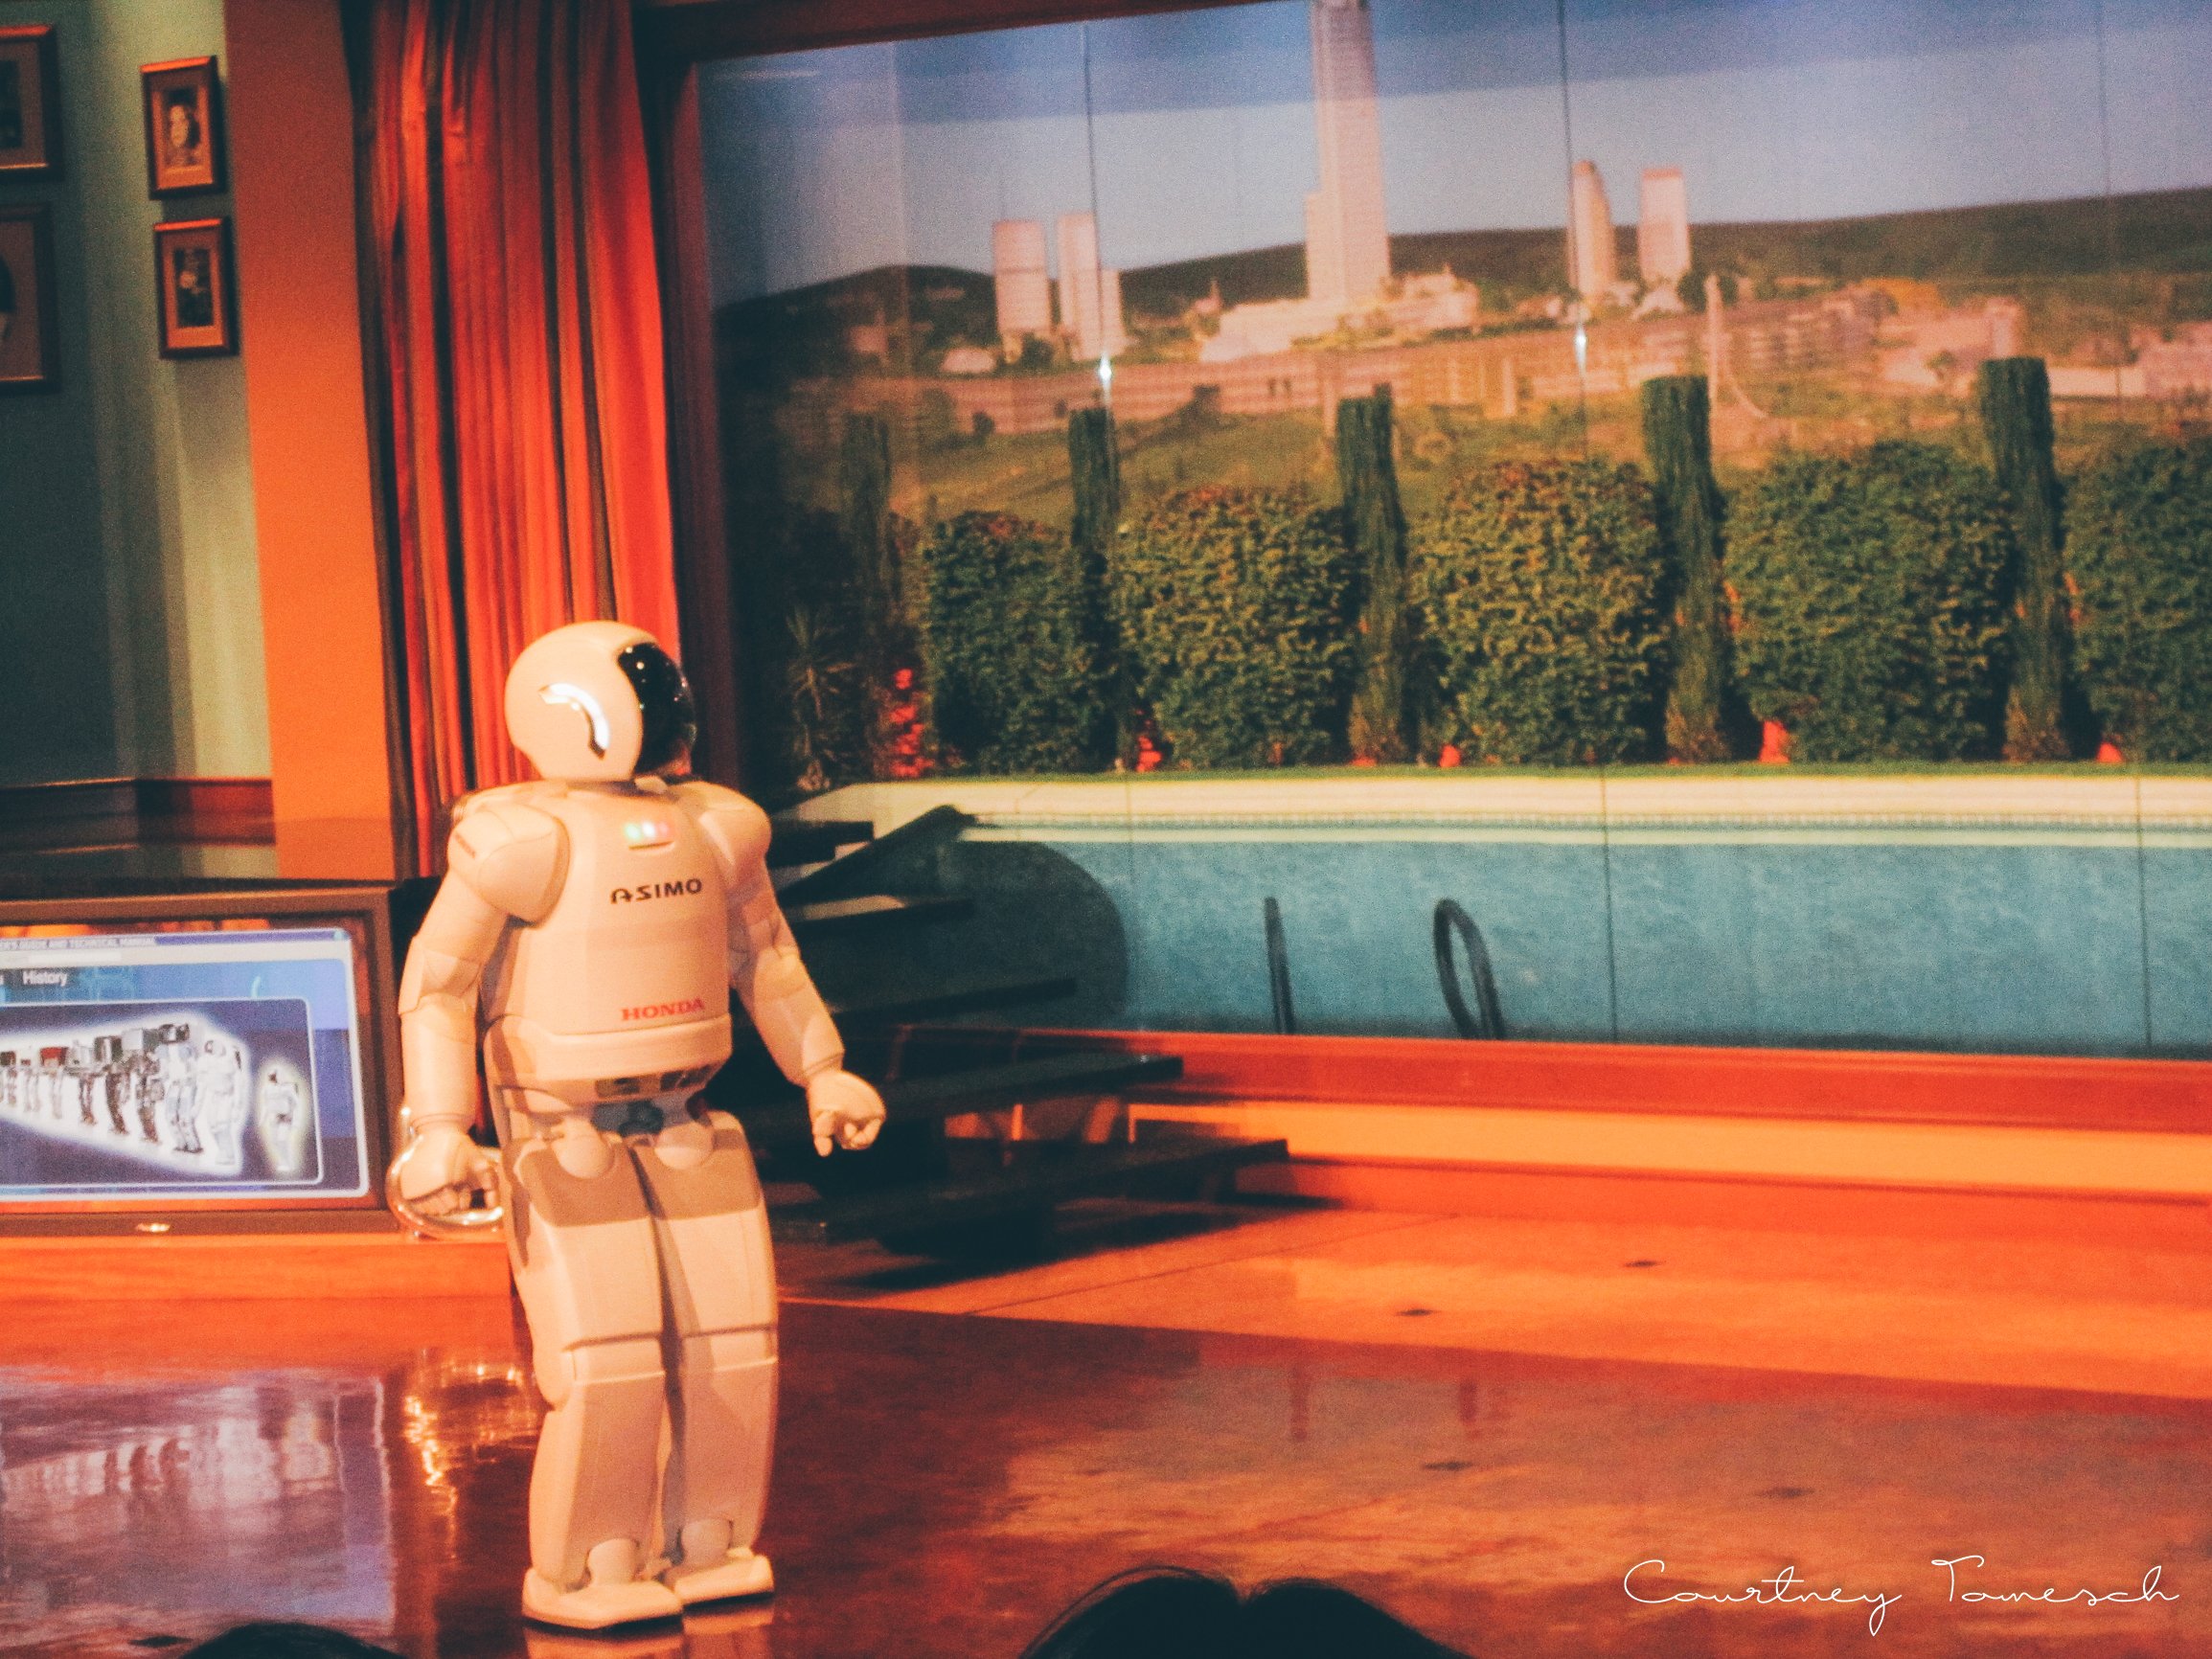 Asimo- this robot can talk, see,  walk, and run. its pretty cool